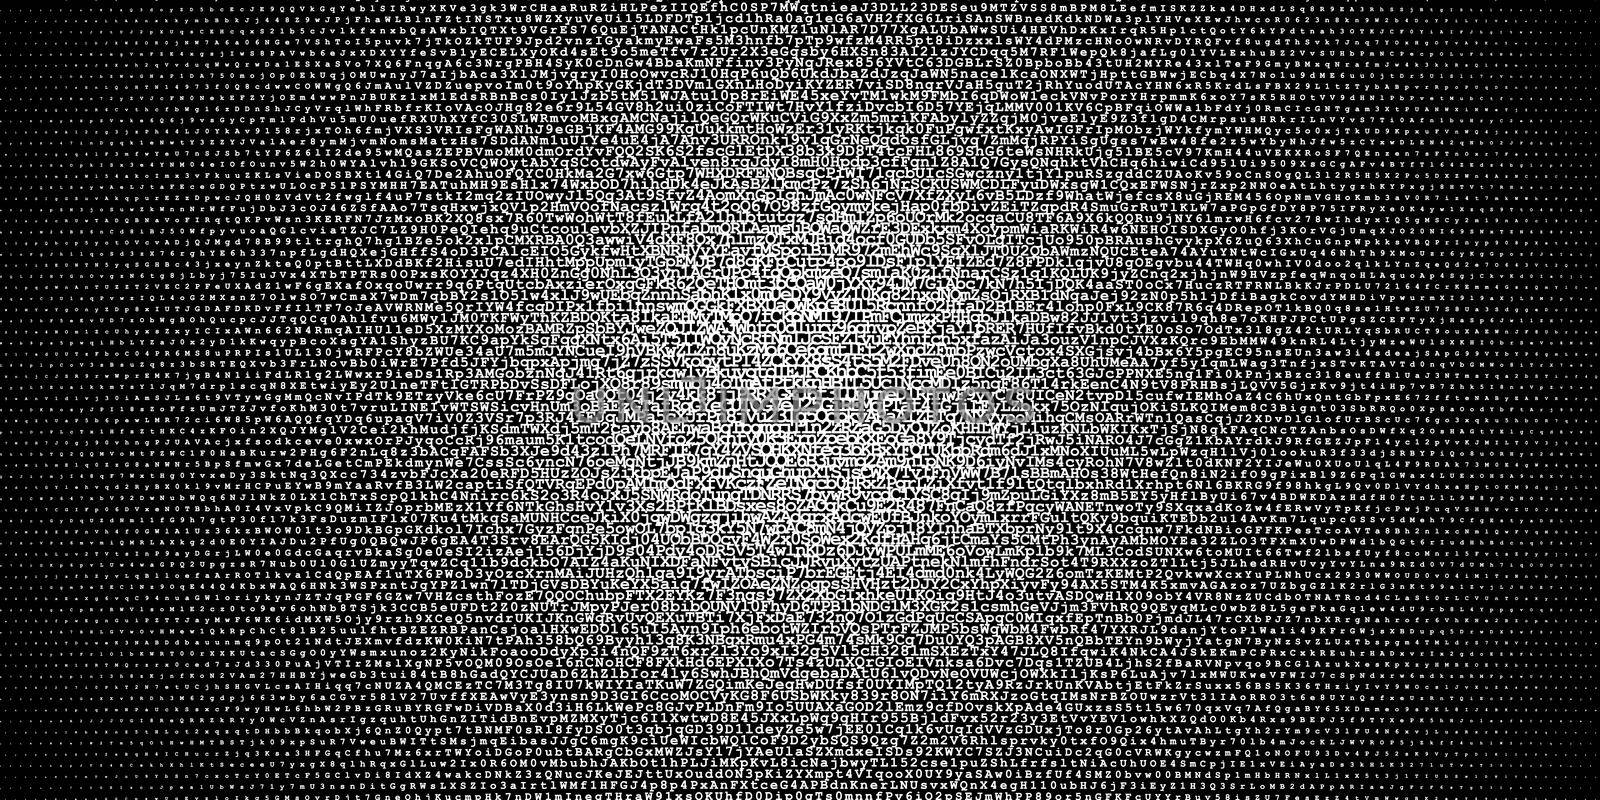 Halftone gradient made of letters and digits by dutourdumonde